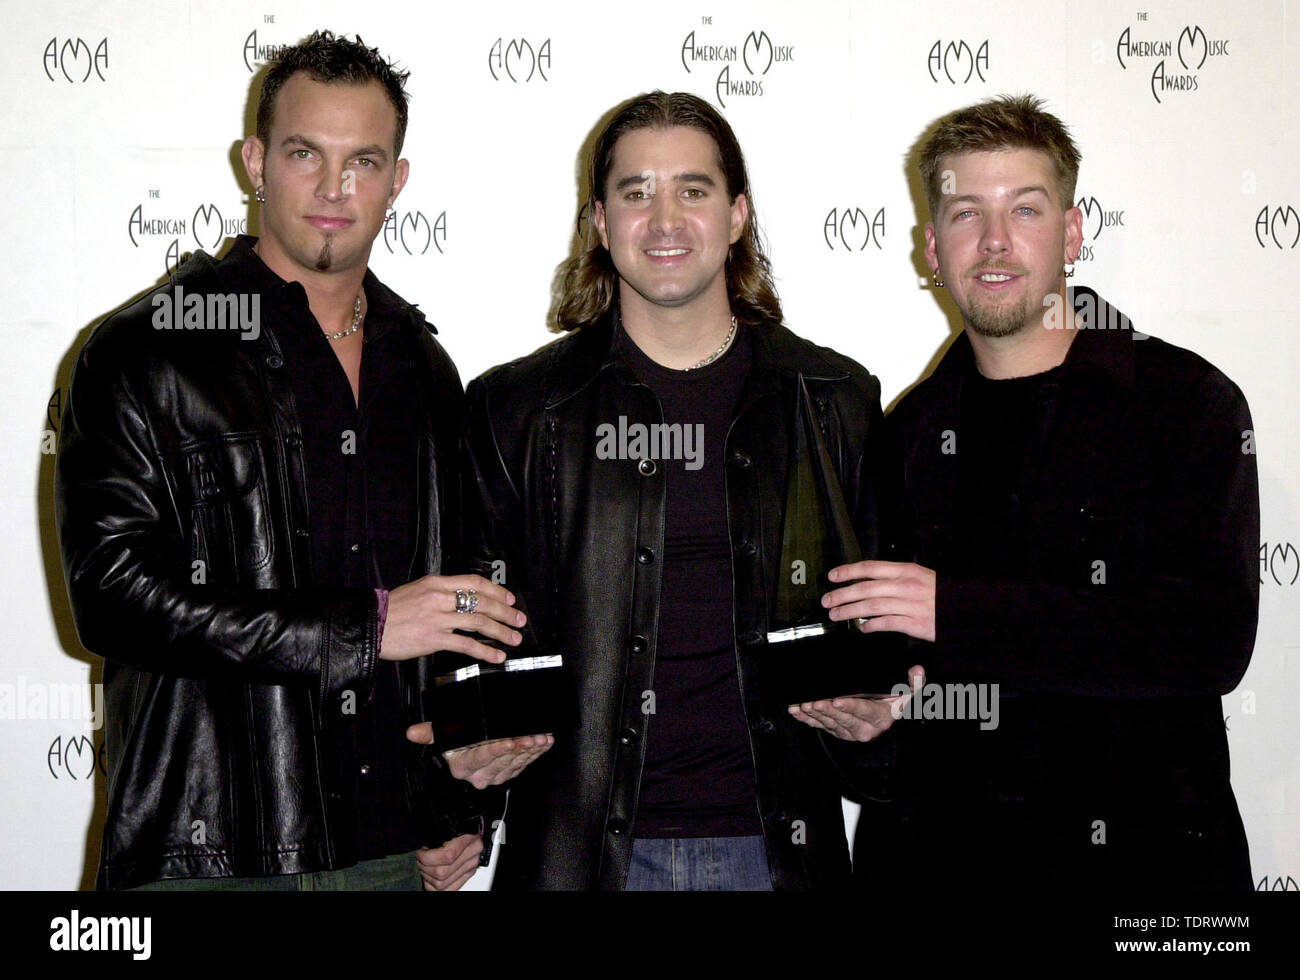 Jan 08, 2001; Los Angeles, CA, USA;  Members of the band Creed (L to R) MIKE TREMONTI, SCOTT STAPP, & SCOTT PHILLIPS @ the 2001 American Music Awards. (Credit Image: © Chris Delmas/ZUMA Wire) Stock Photo